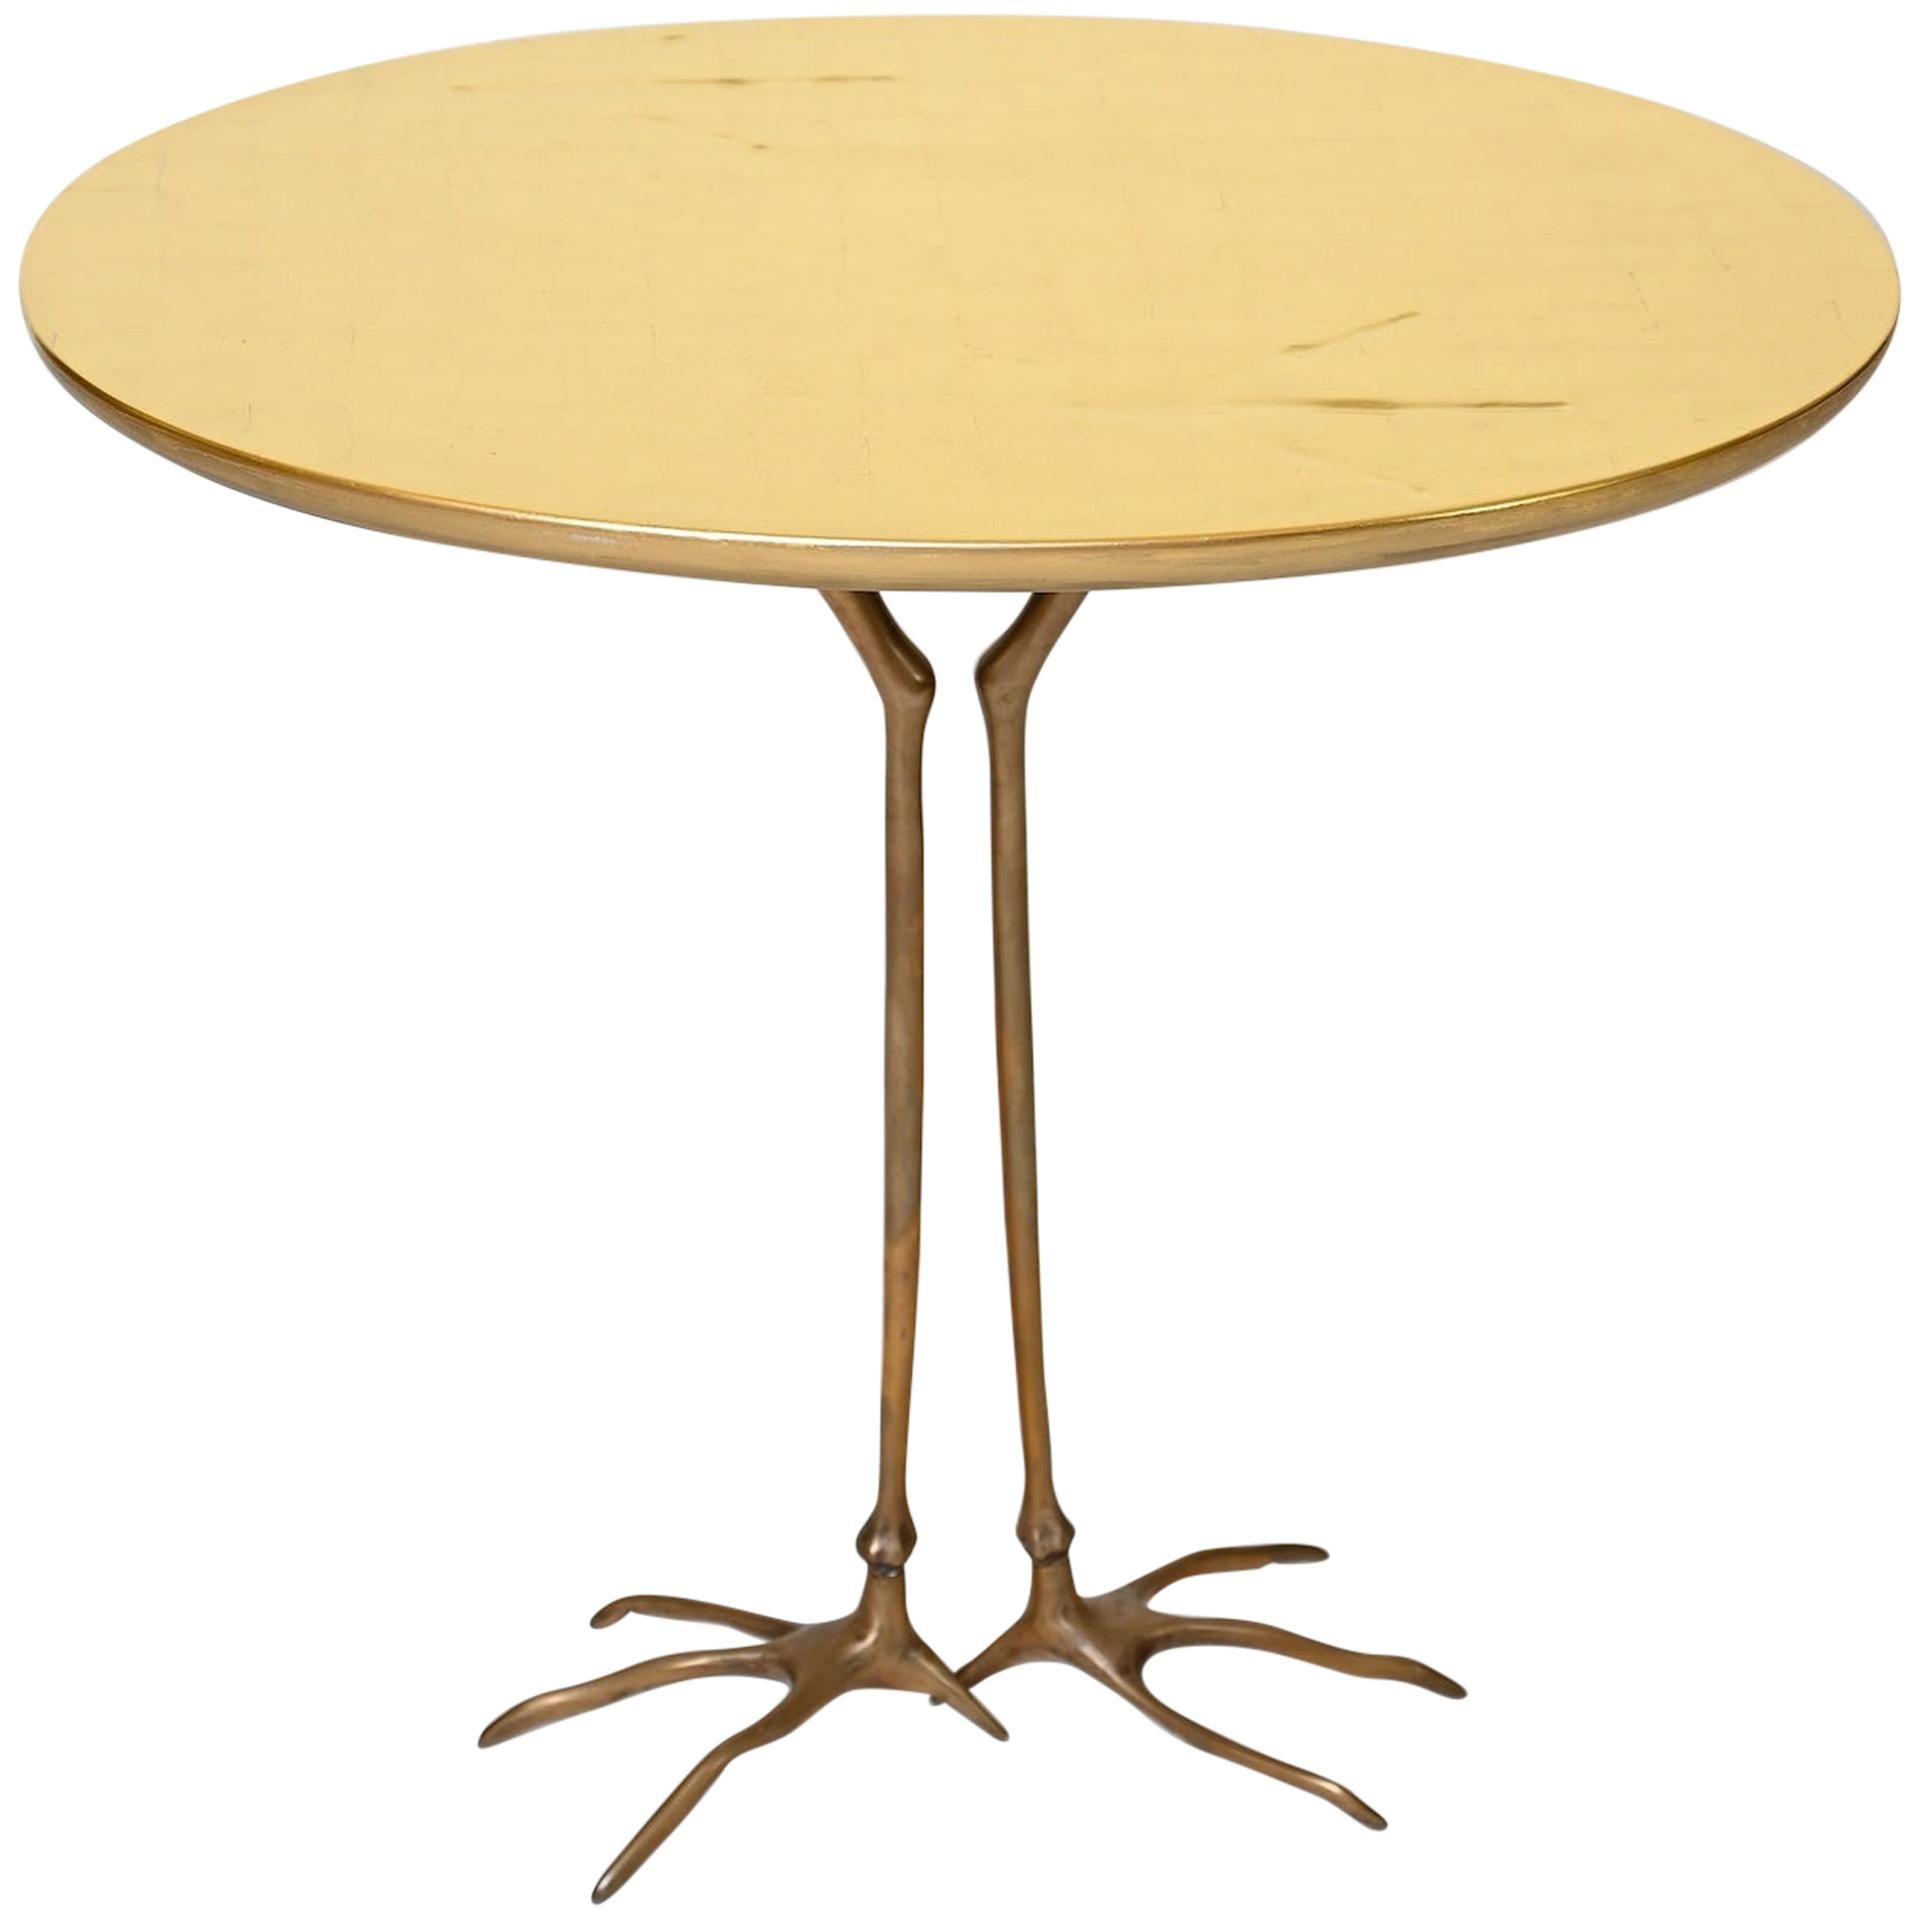 Gold Leaf 'Traccia' Table by Meret Oppenheim